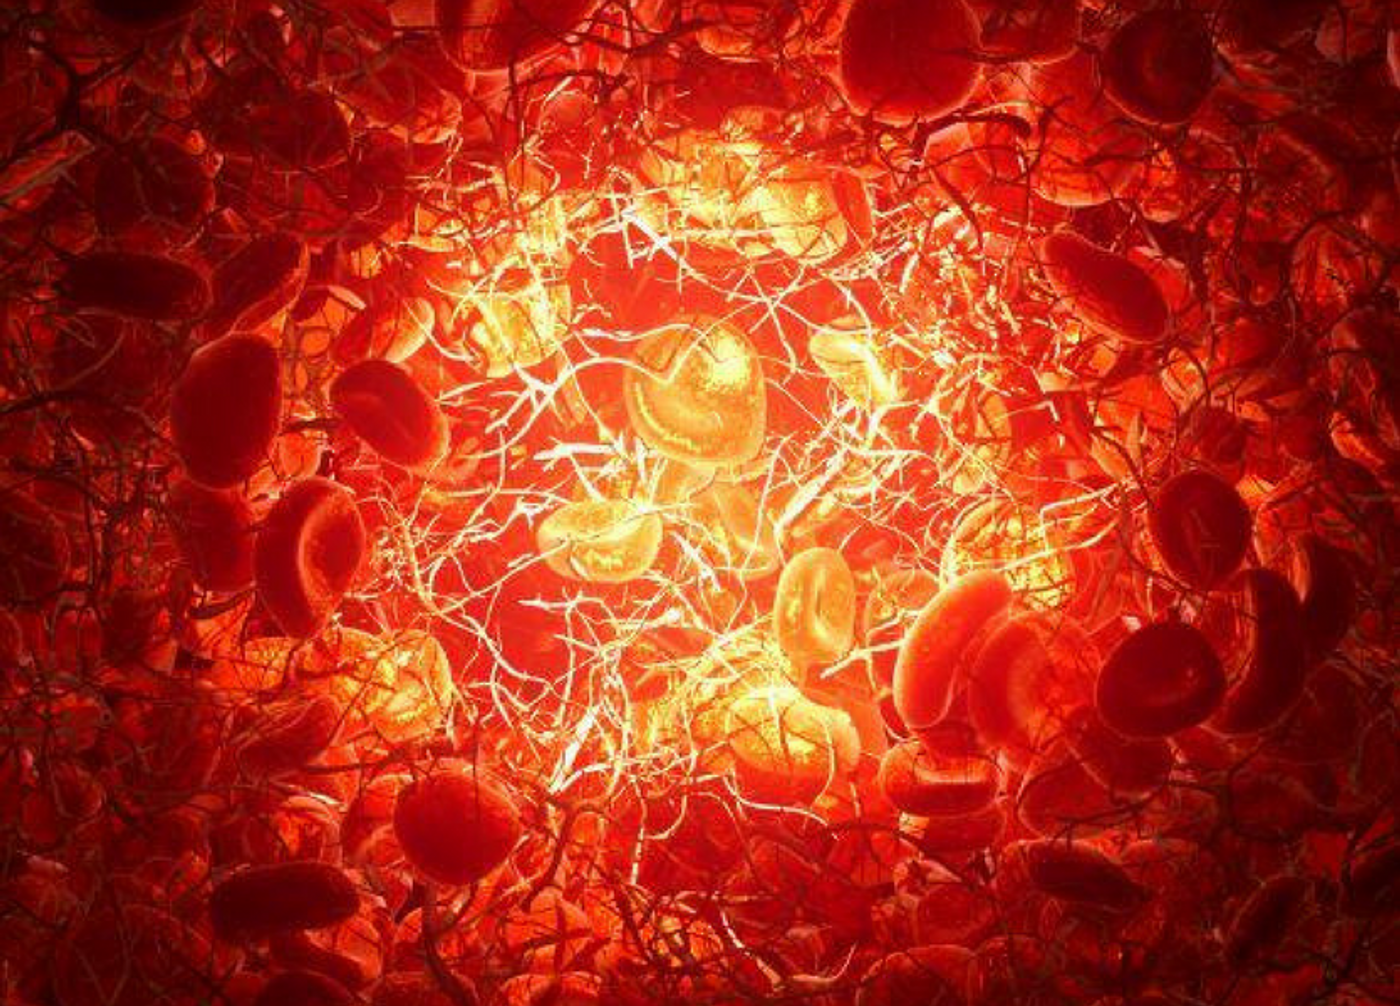 Light introduced through an optical fiber can determine whether a patient's blood is coagulating by measuring the vibration of red blood cells. Credit: Andrii Pshenychnyi